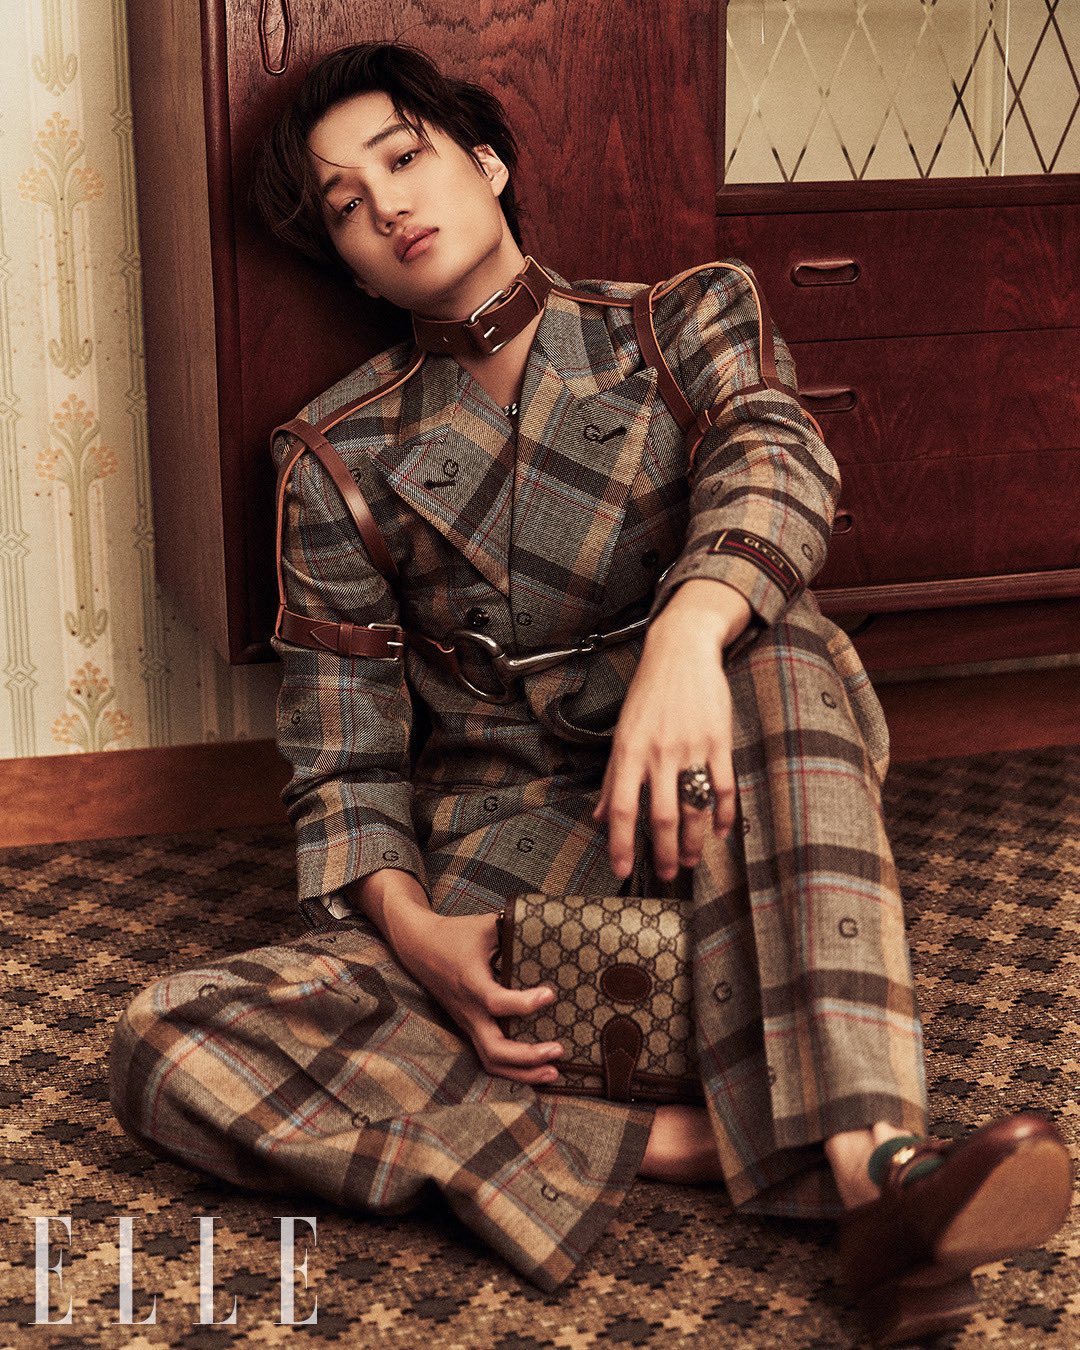 EXO Kai, solo comeback after a year… New album 'Peaches' released on the 30th